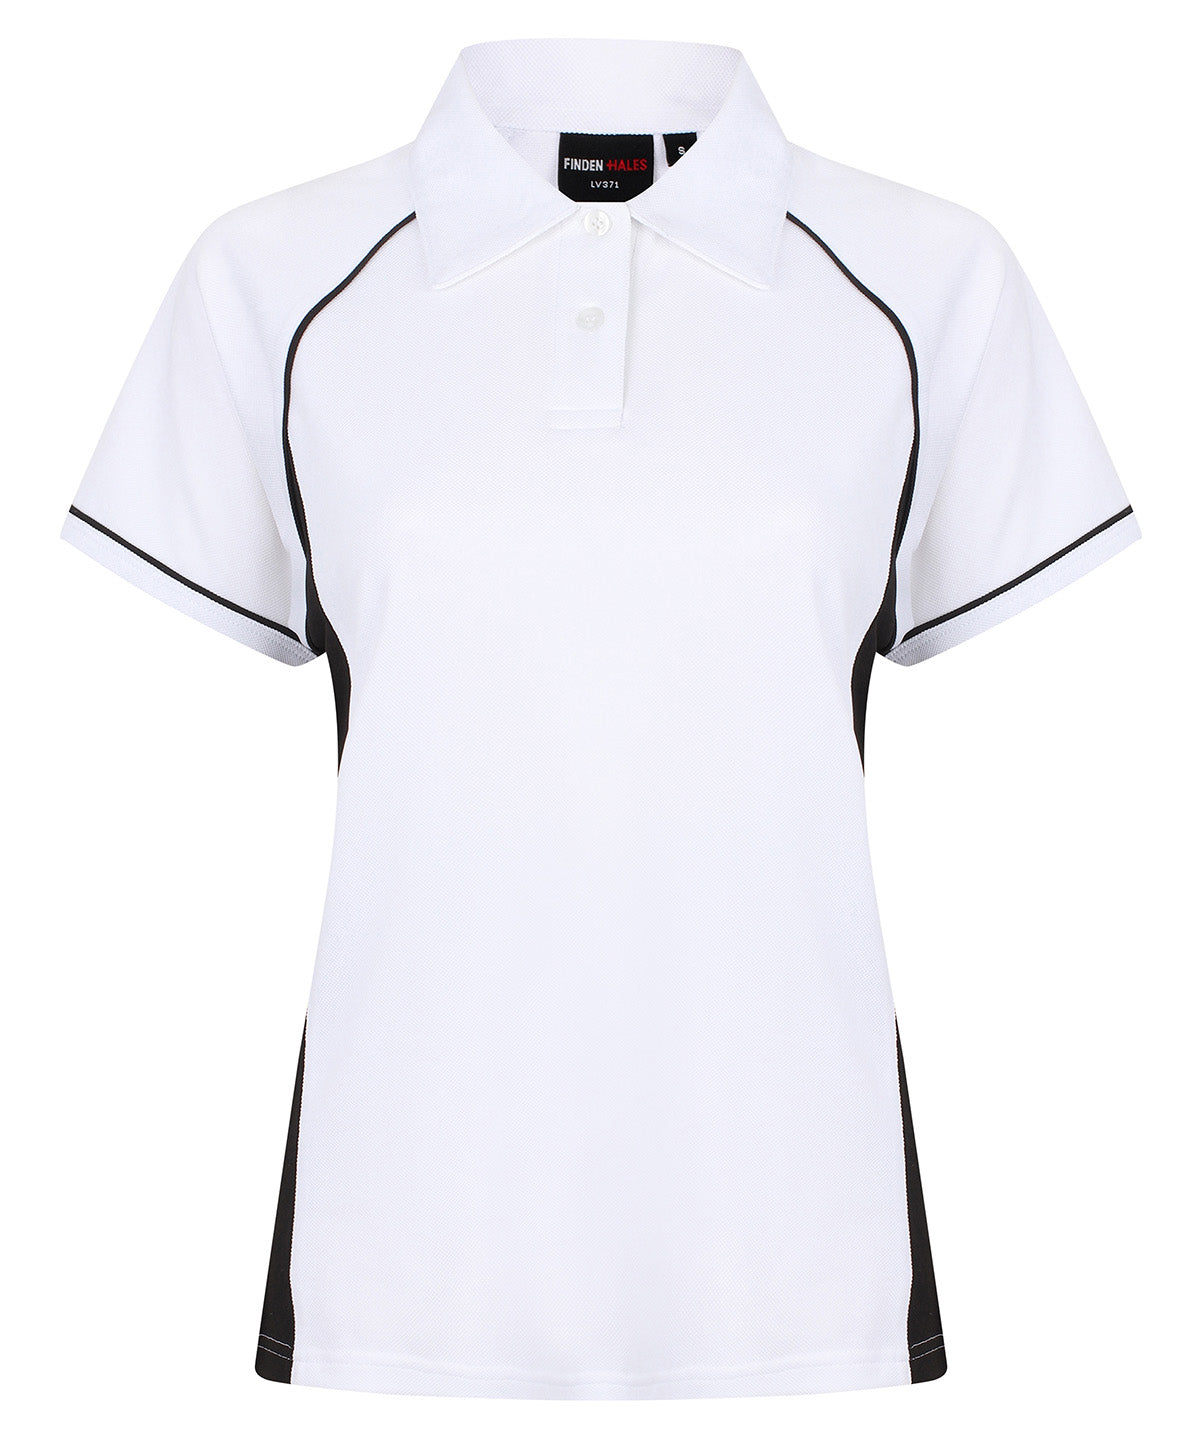 Personalised Polo Shirts - Black Finden & Hales Women's piped performance polo